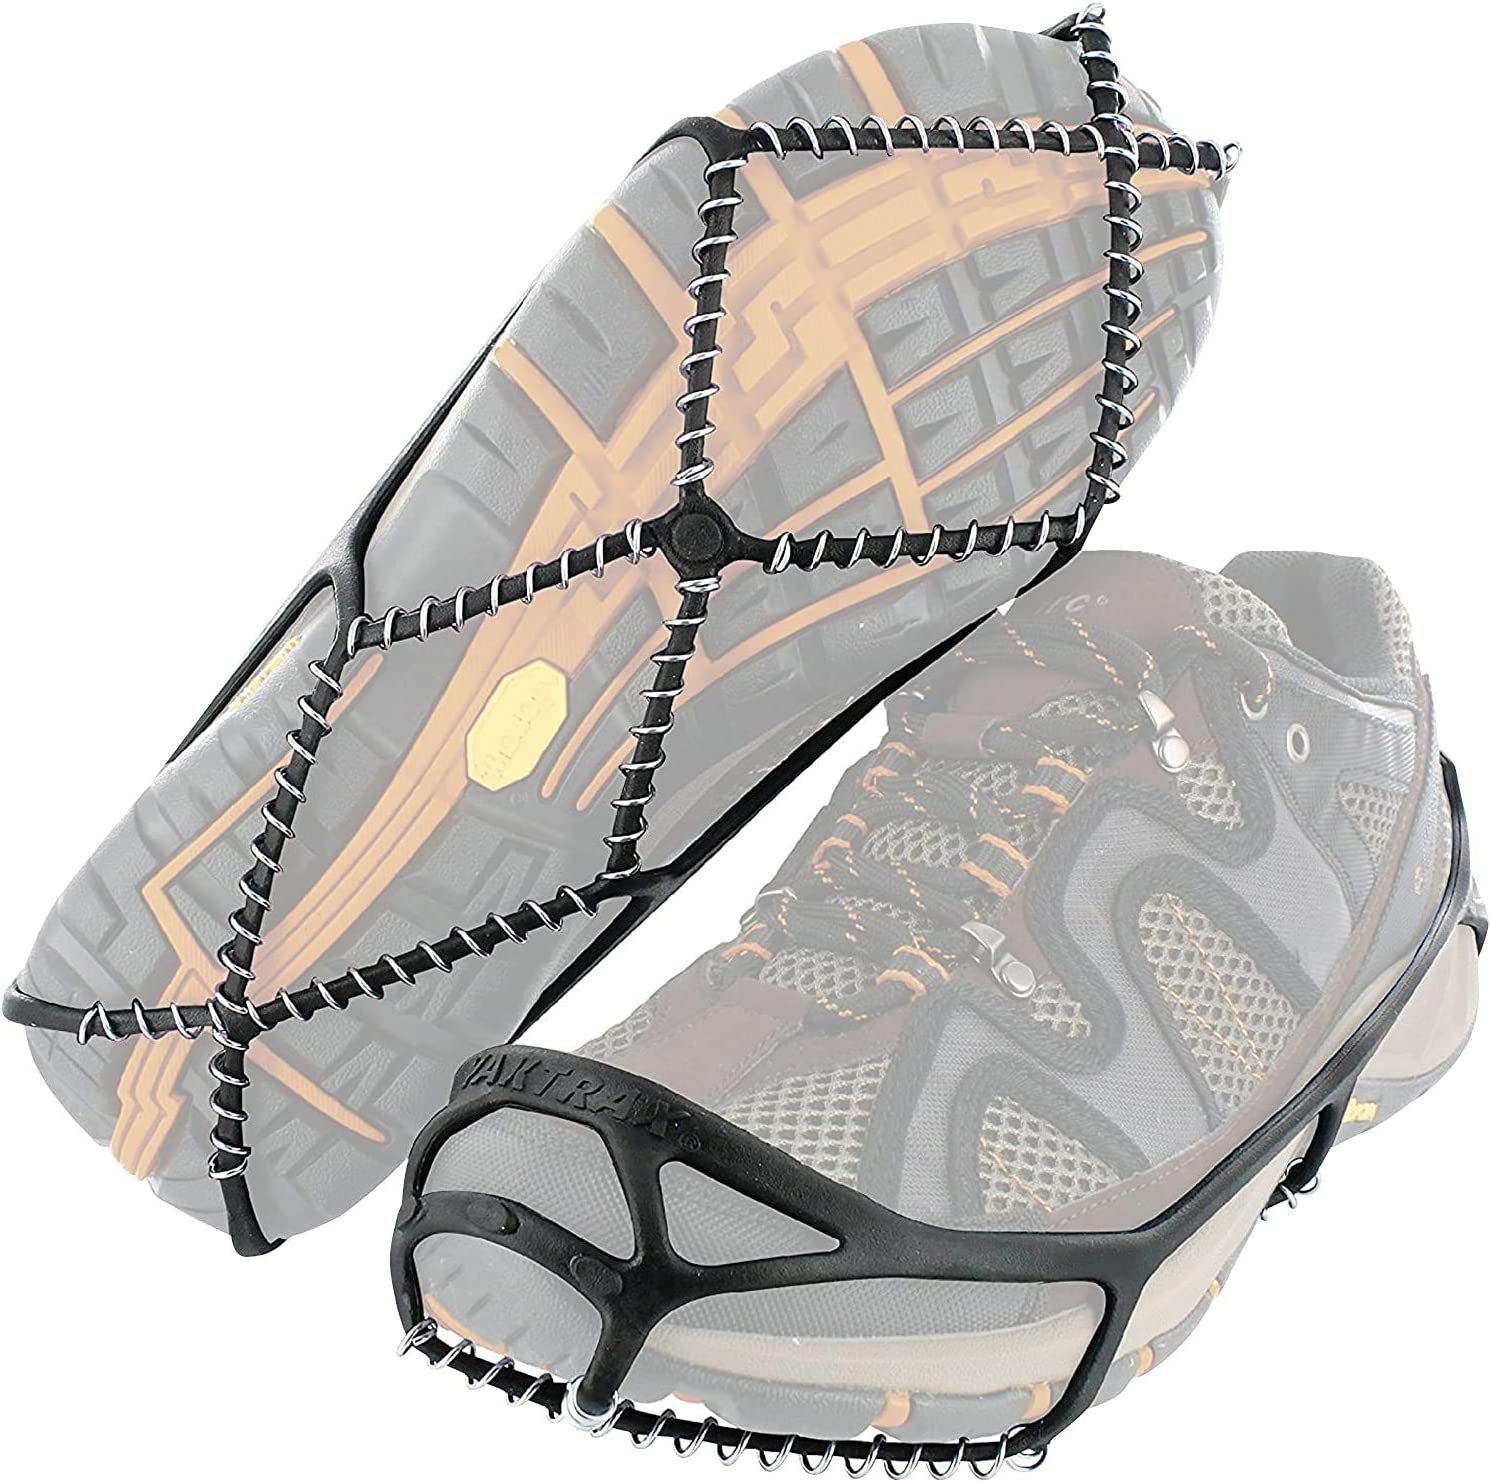 Walk Traction Cleats for Walking on Ice and Snow, Ice Cleats for Shoes and Boots, Crampons for Hiking Boots